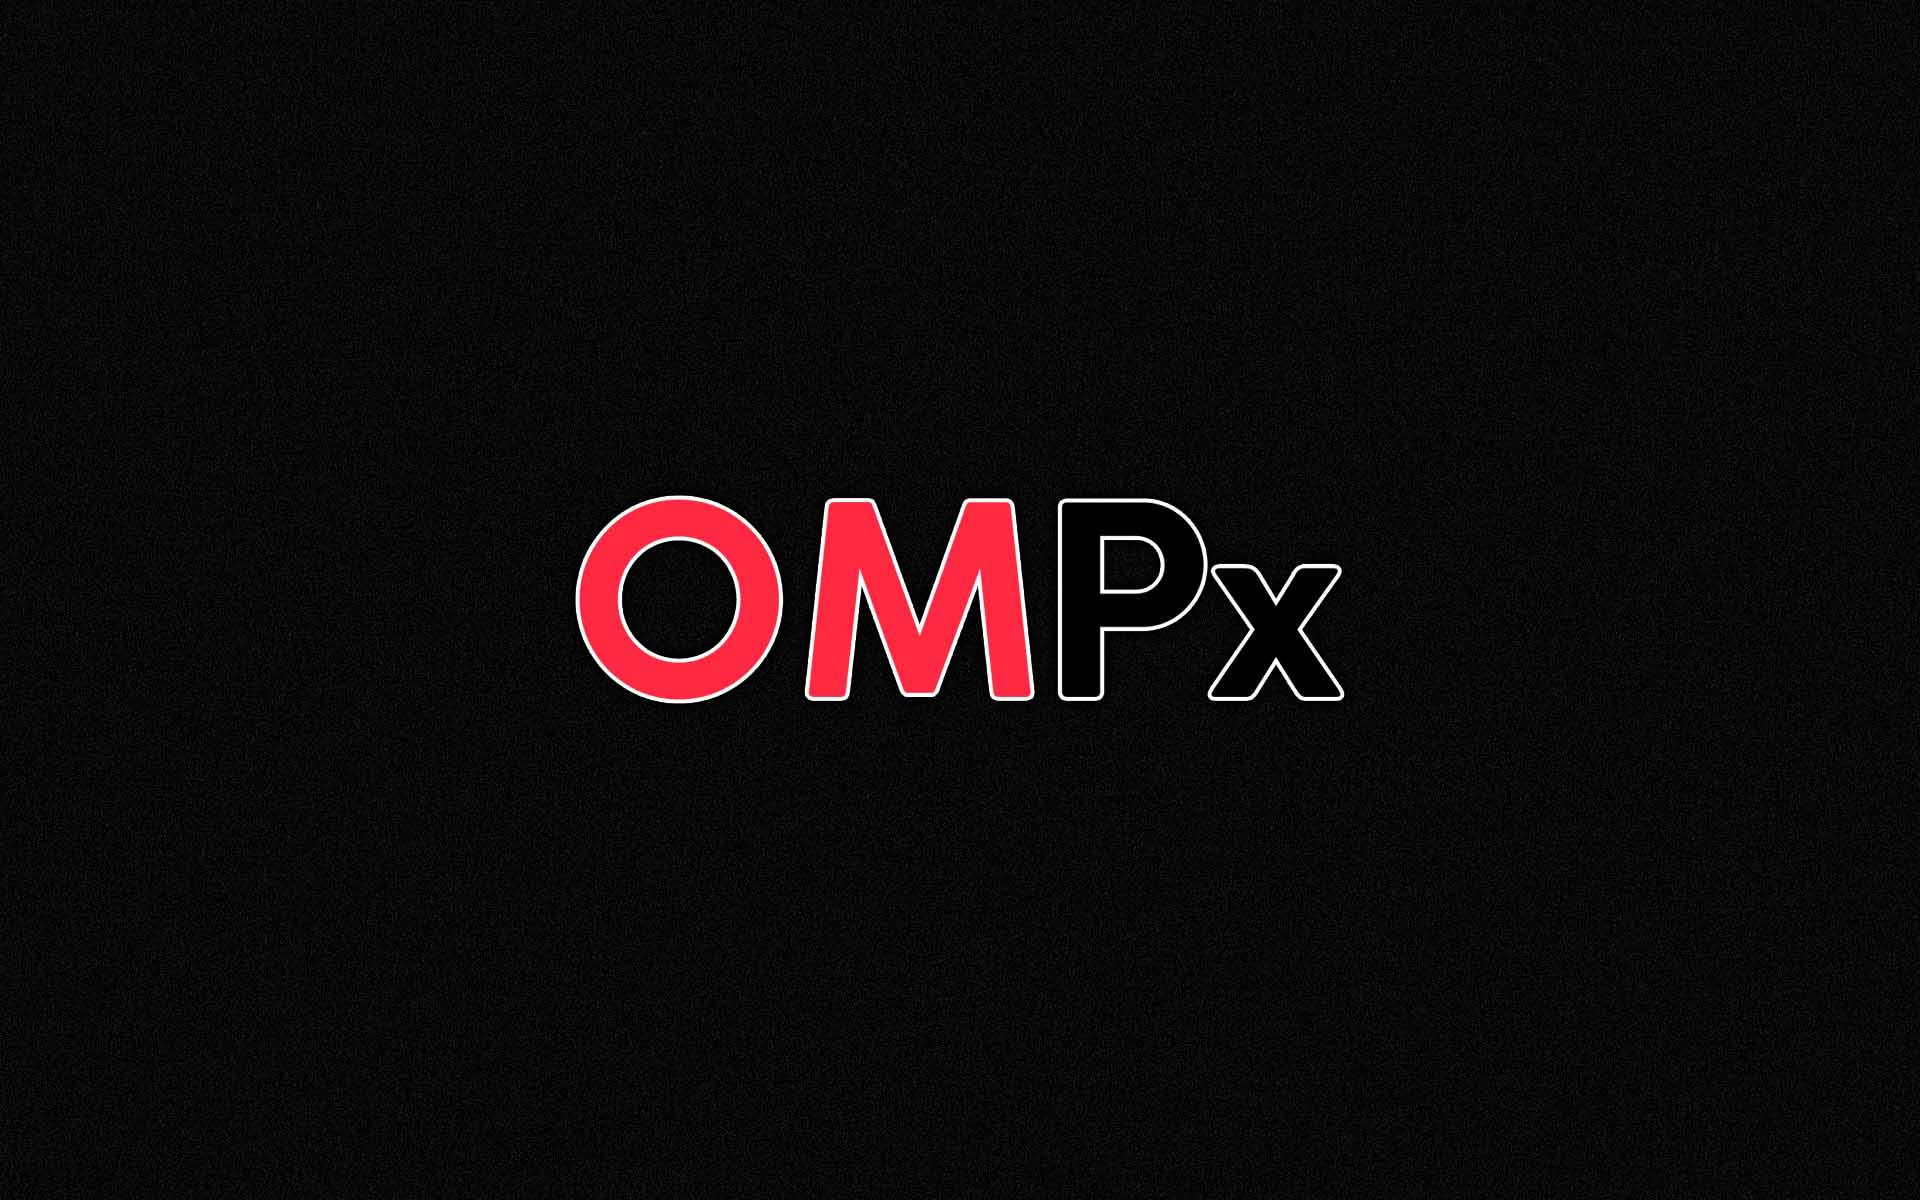 BREAKING NEWS: OMPx Game Announces Limited Supply of Playground Tokens Available for Free to Walk-In Players